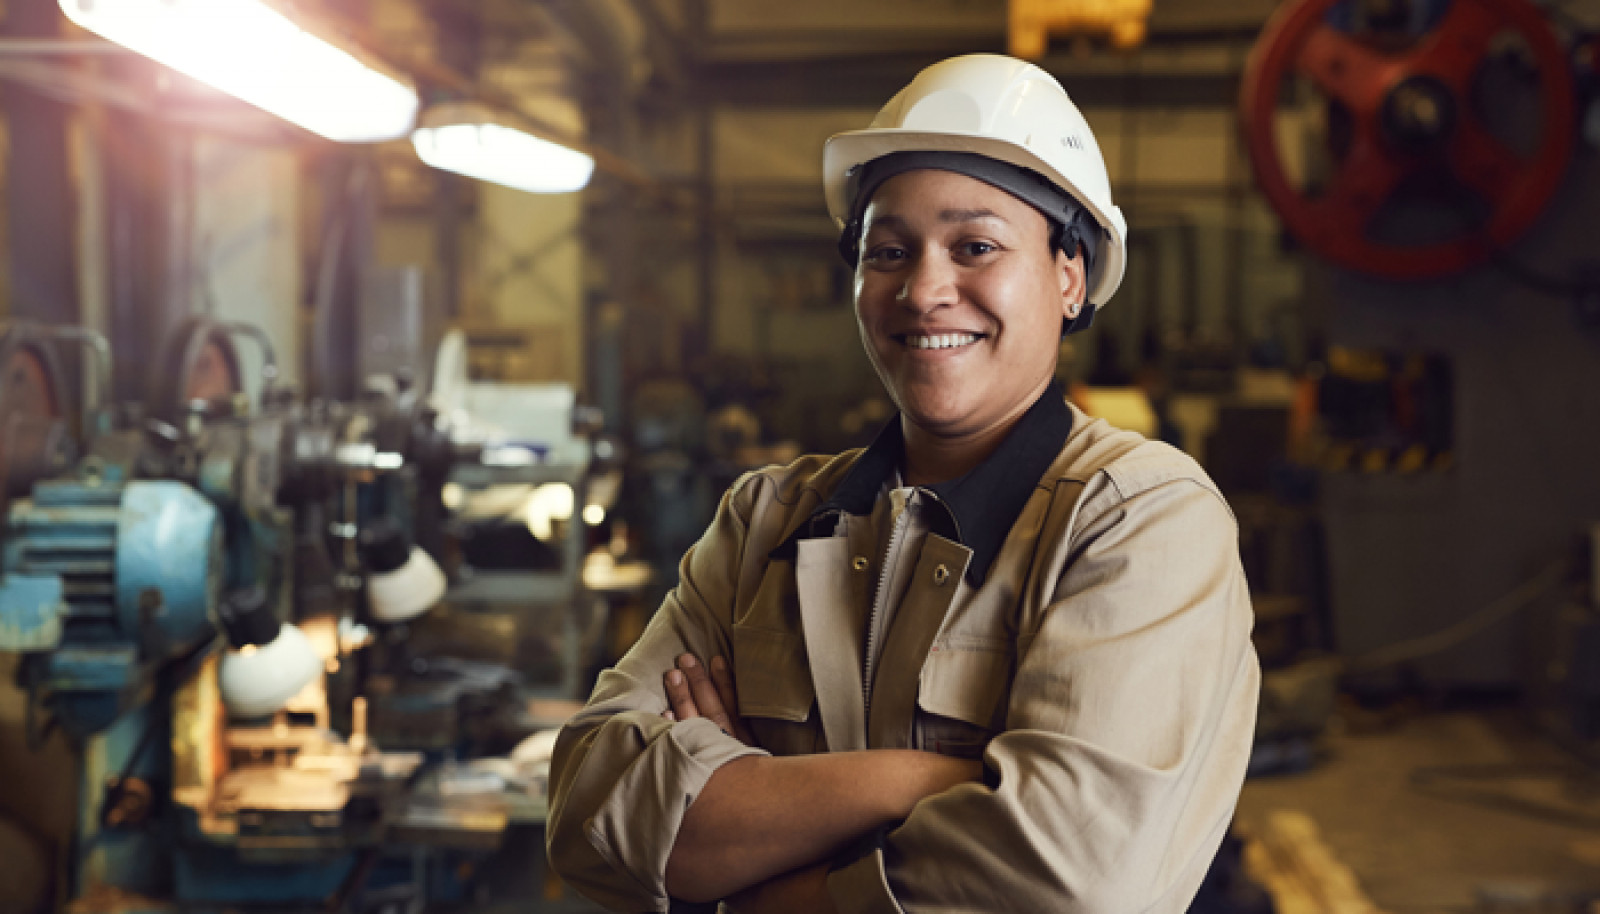 Upskilling Manufacturing Talent in an Evolving Industry